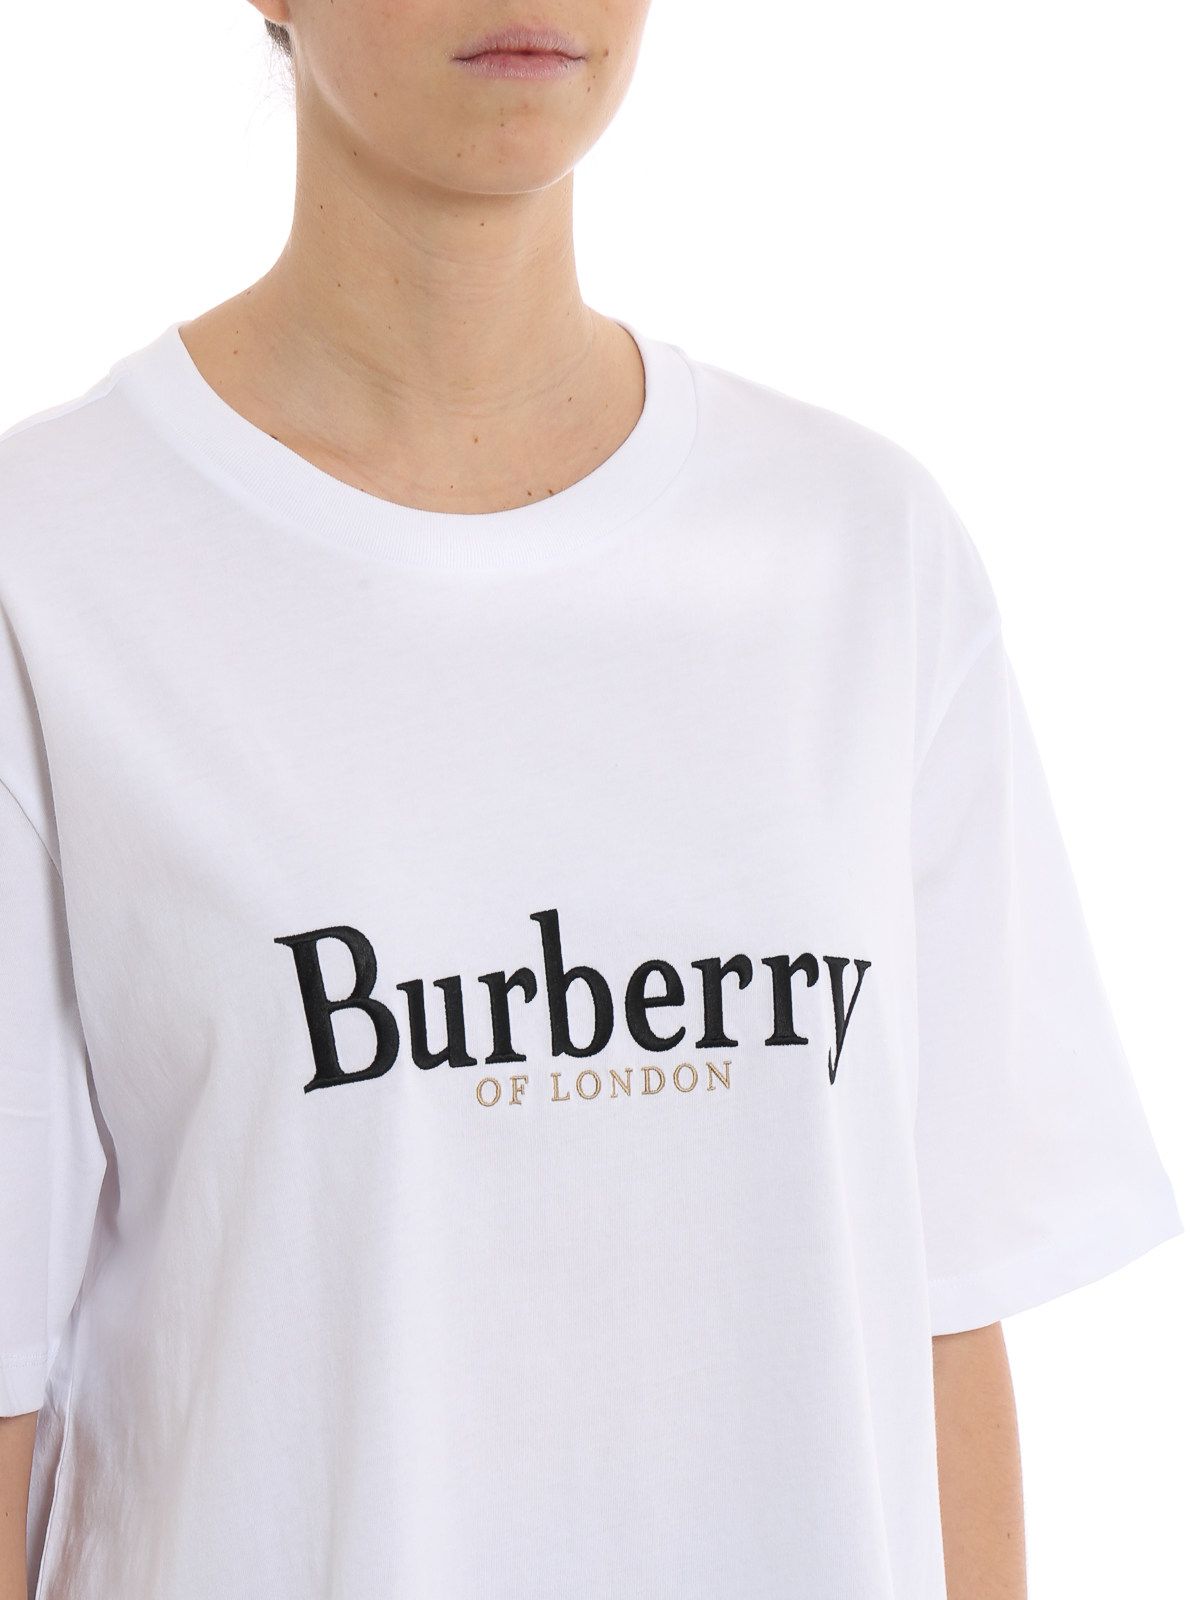 t shirt embroidery london